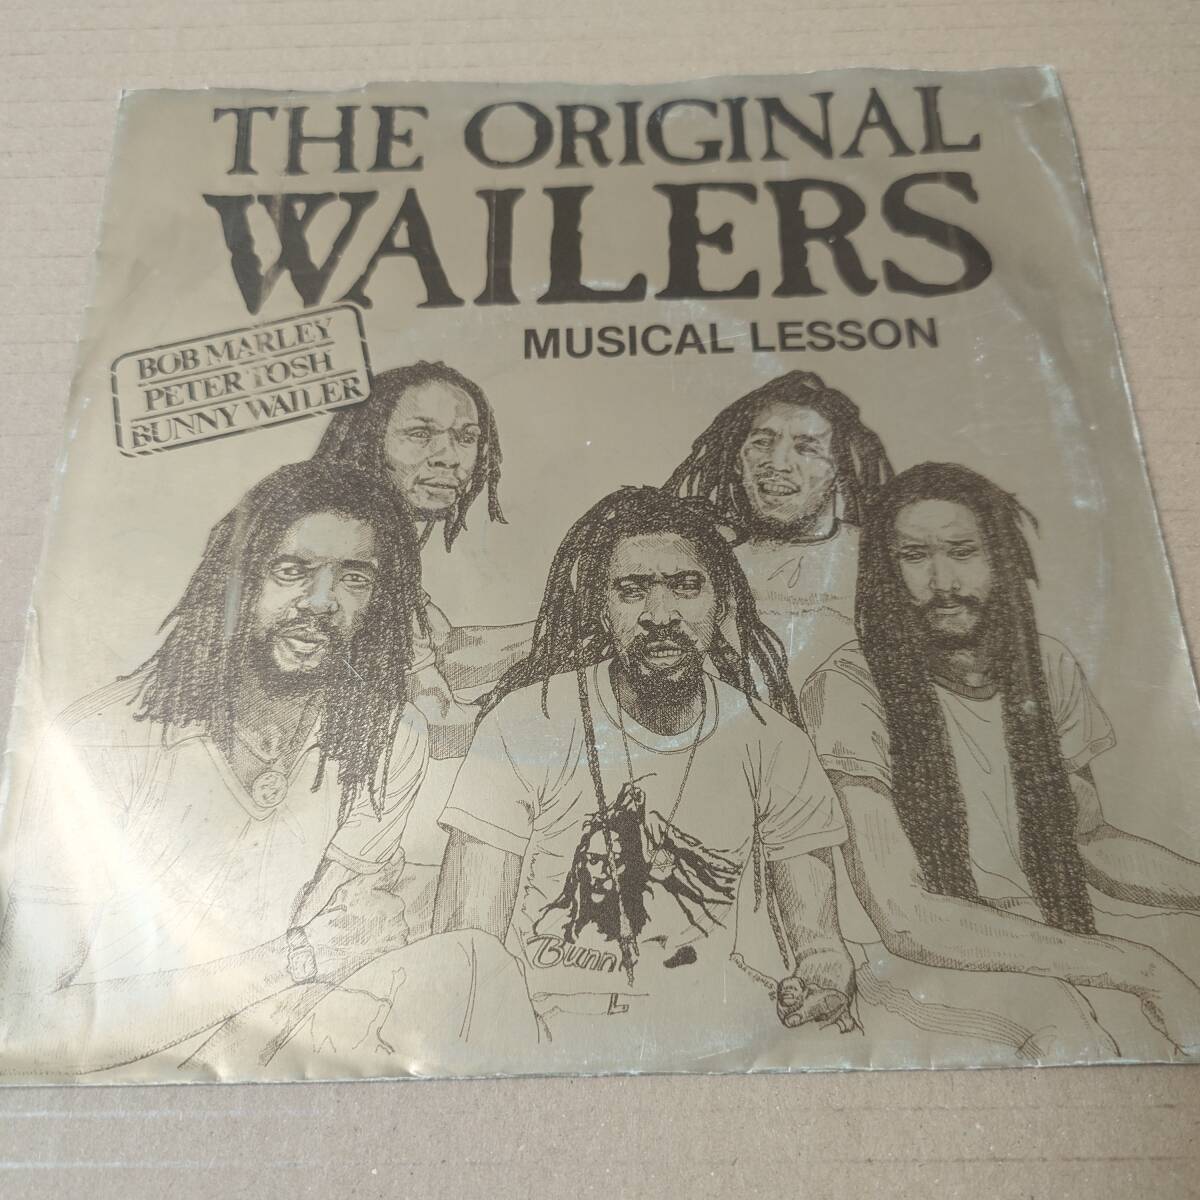 The Original Wailers - Music Lesson / Nice Time // Island Records 7inch / Roots / Bob Marley / Musical / AA0649 の画像1